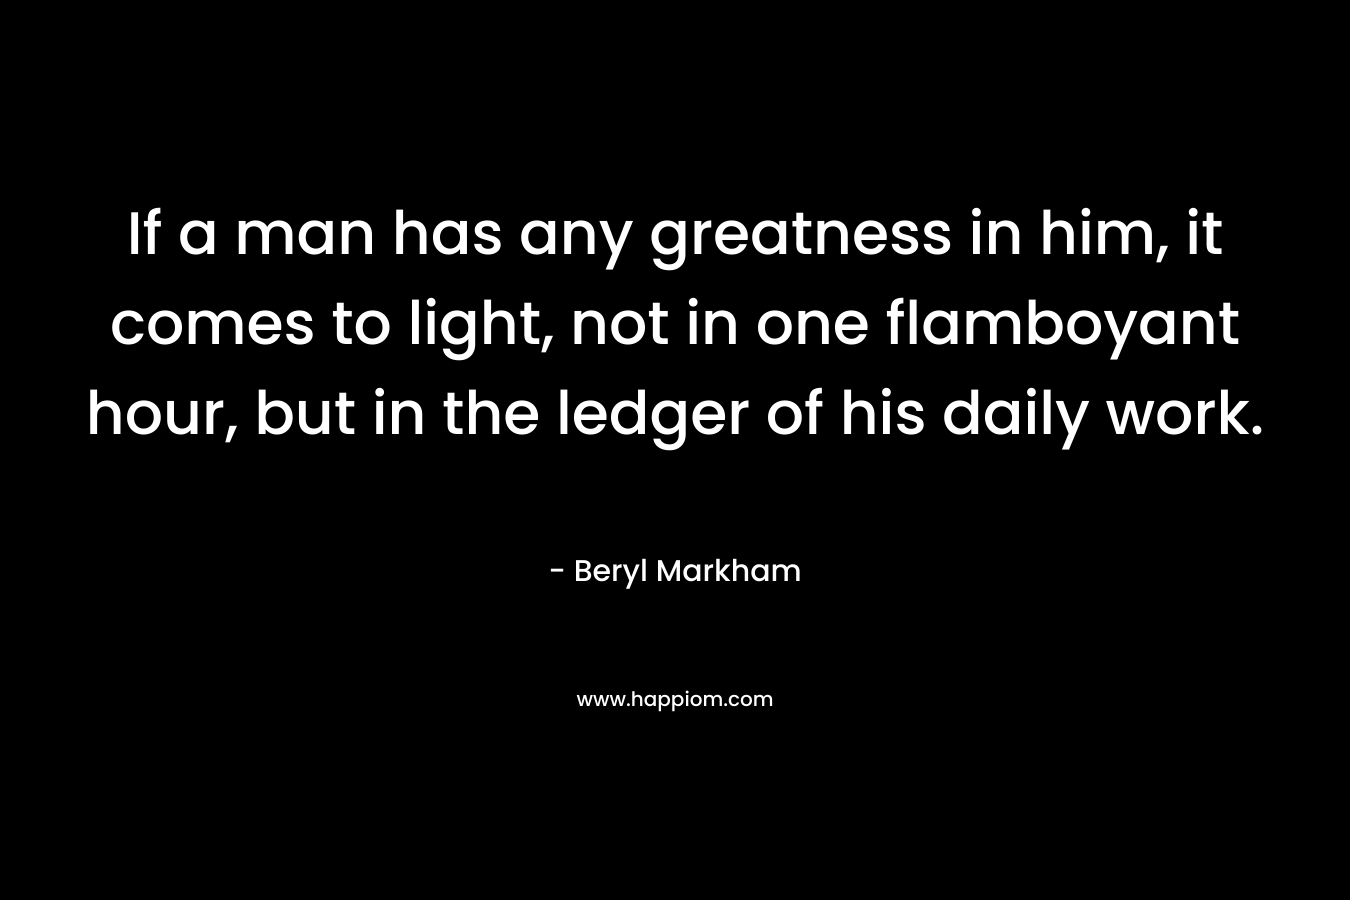 If a man has any greatness in him, it comes to light, not in one flamboyant hour, but in the ledger of his daily work.